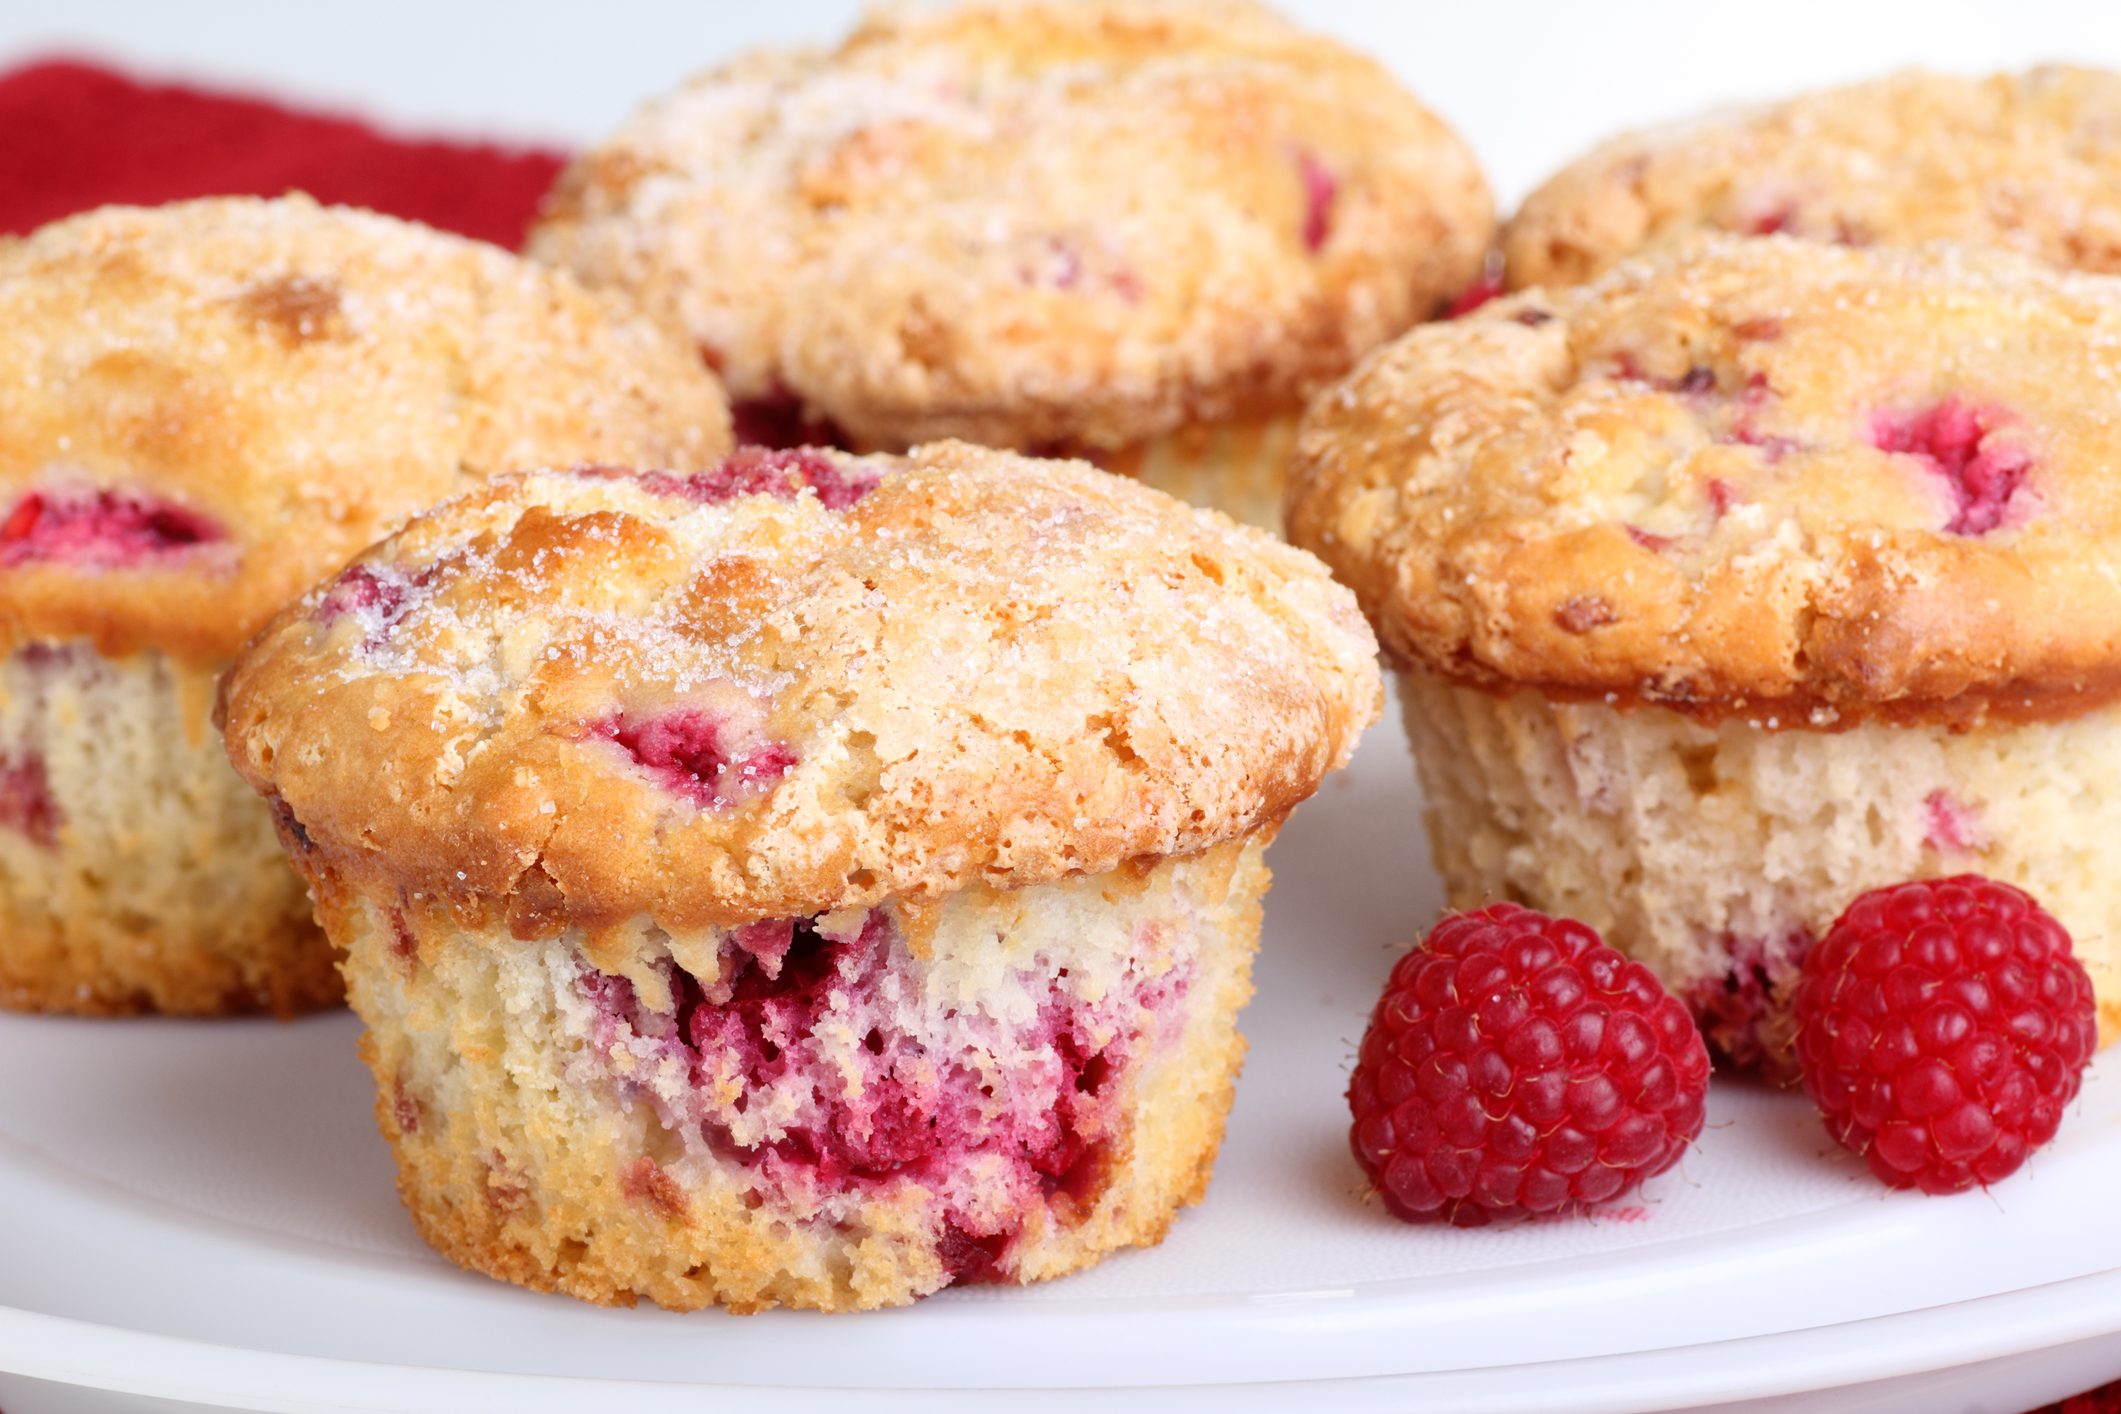 The snack: Must-try healthy muffin recipes - Canadian Cycling Magazine